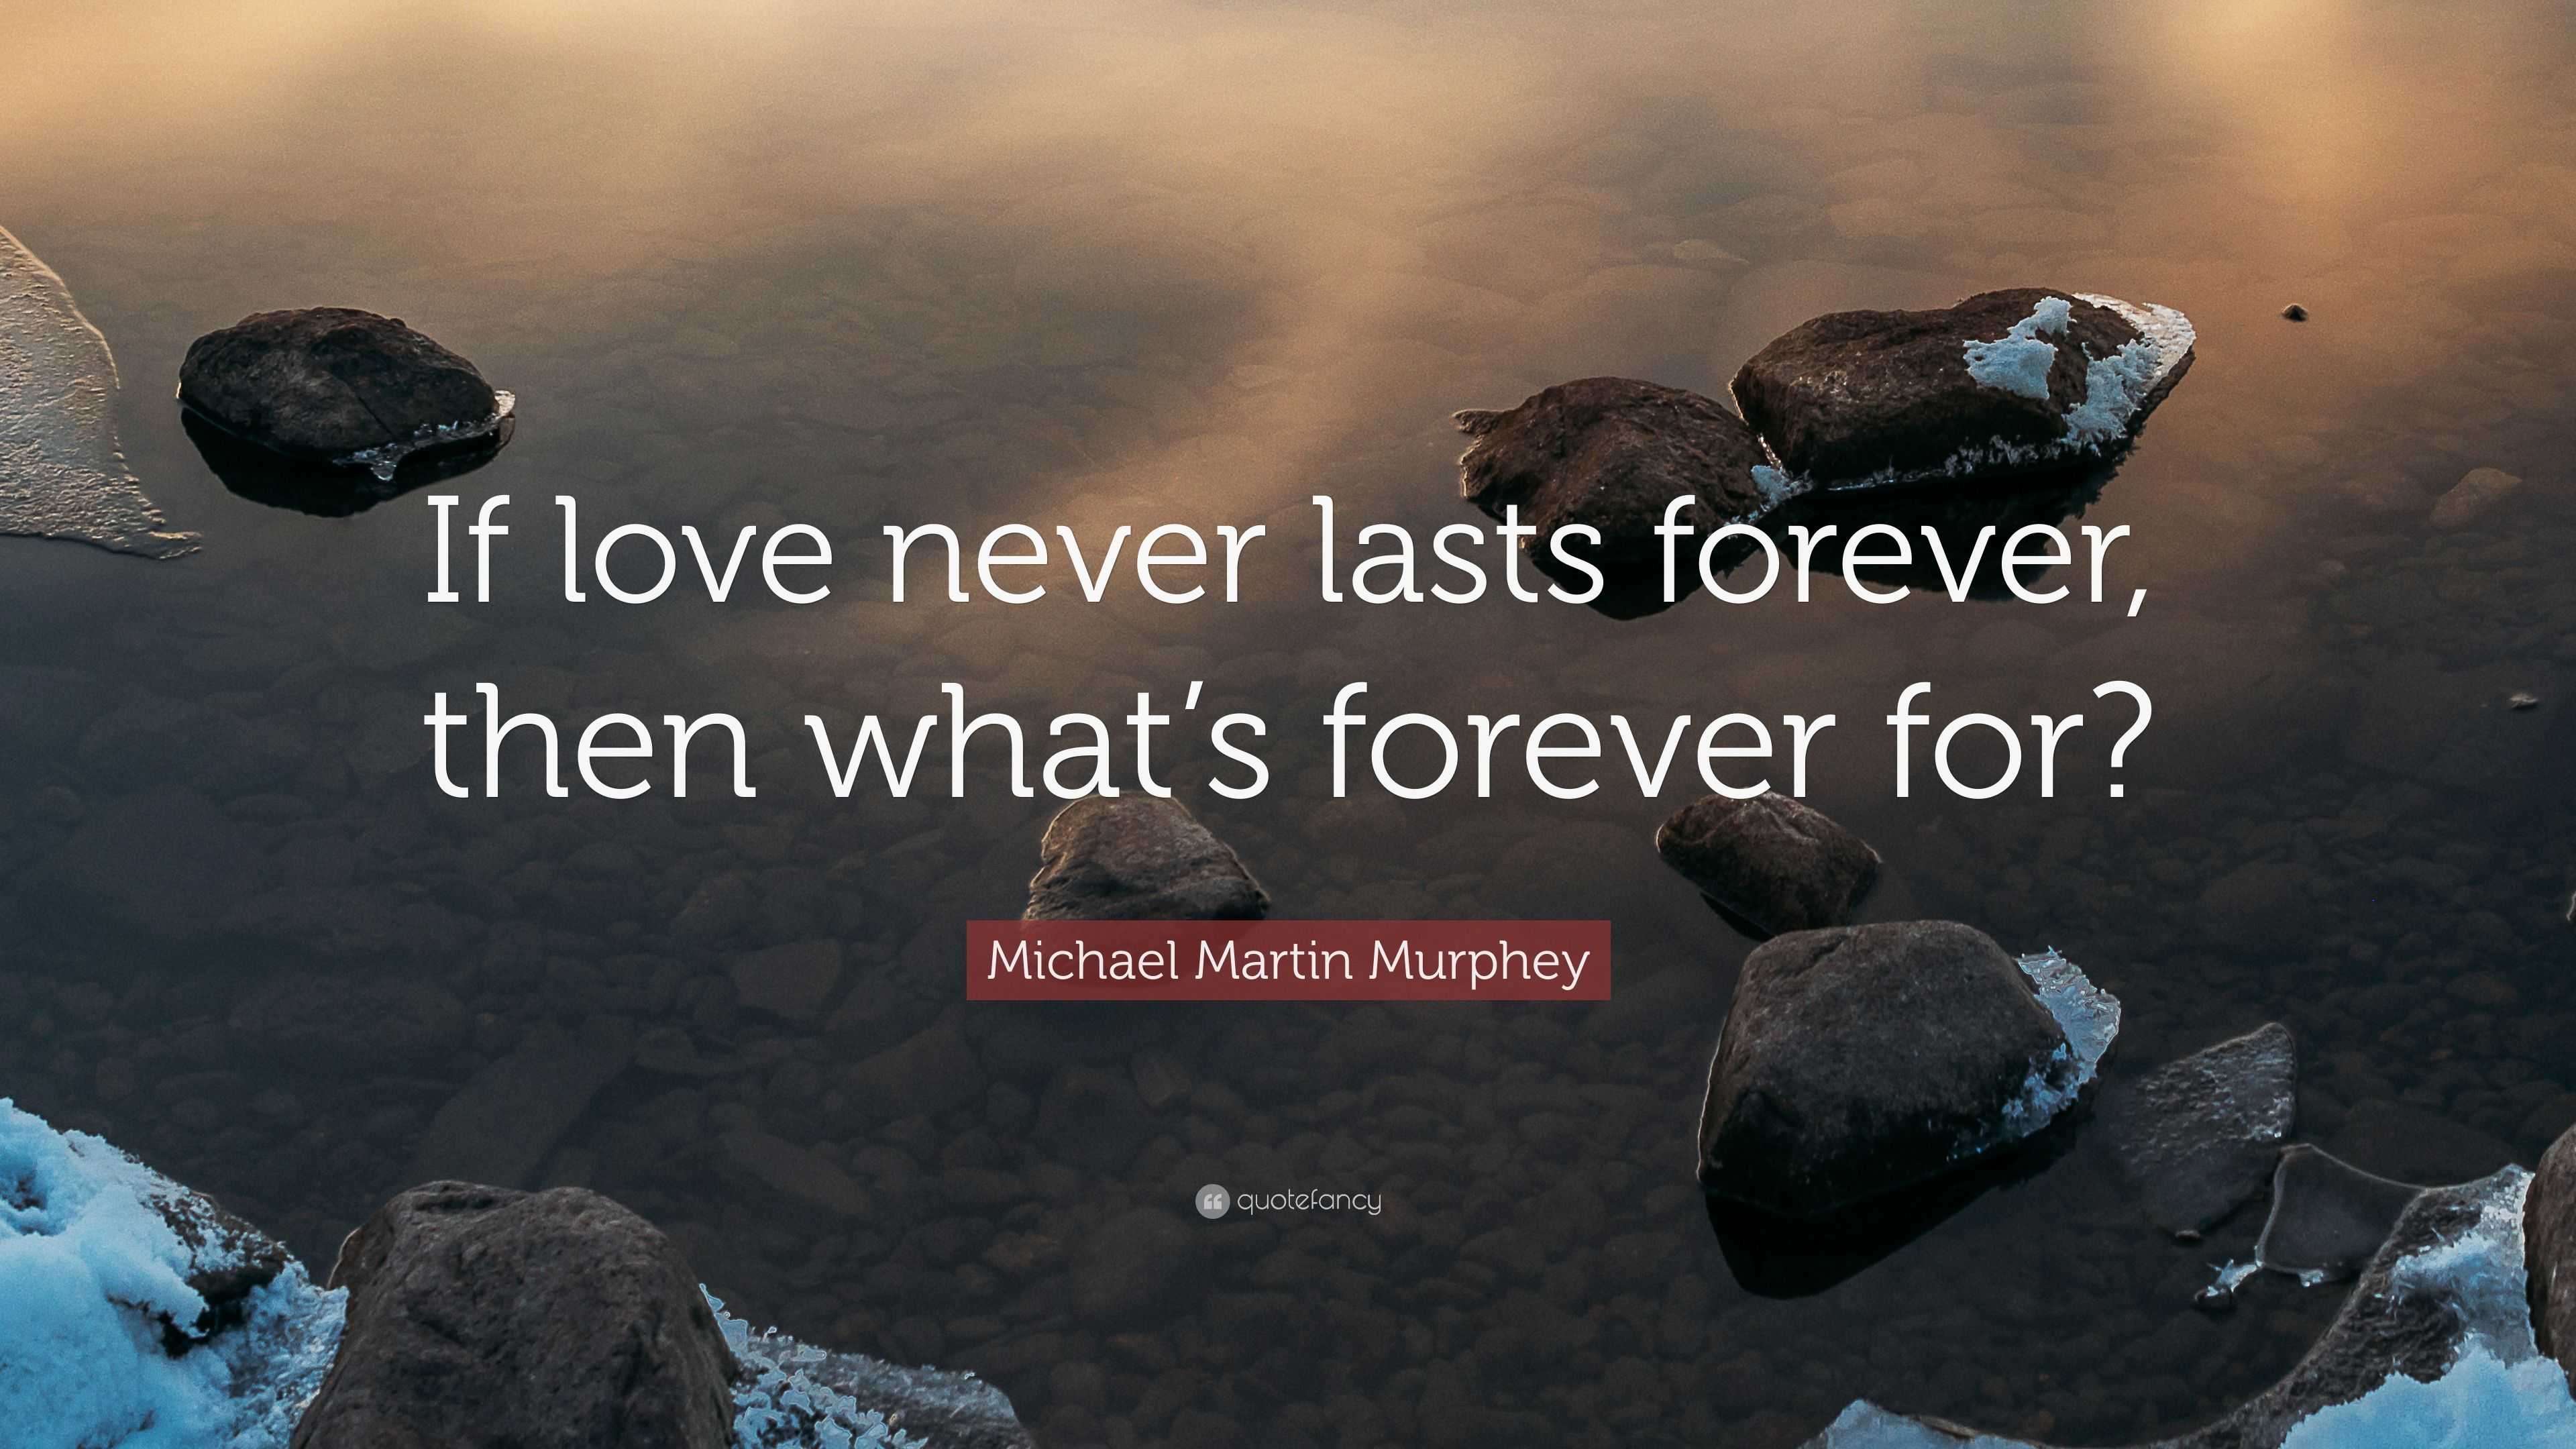 Michael Martin Murphey Quote “If love never lasts forever then what s forever for